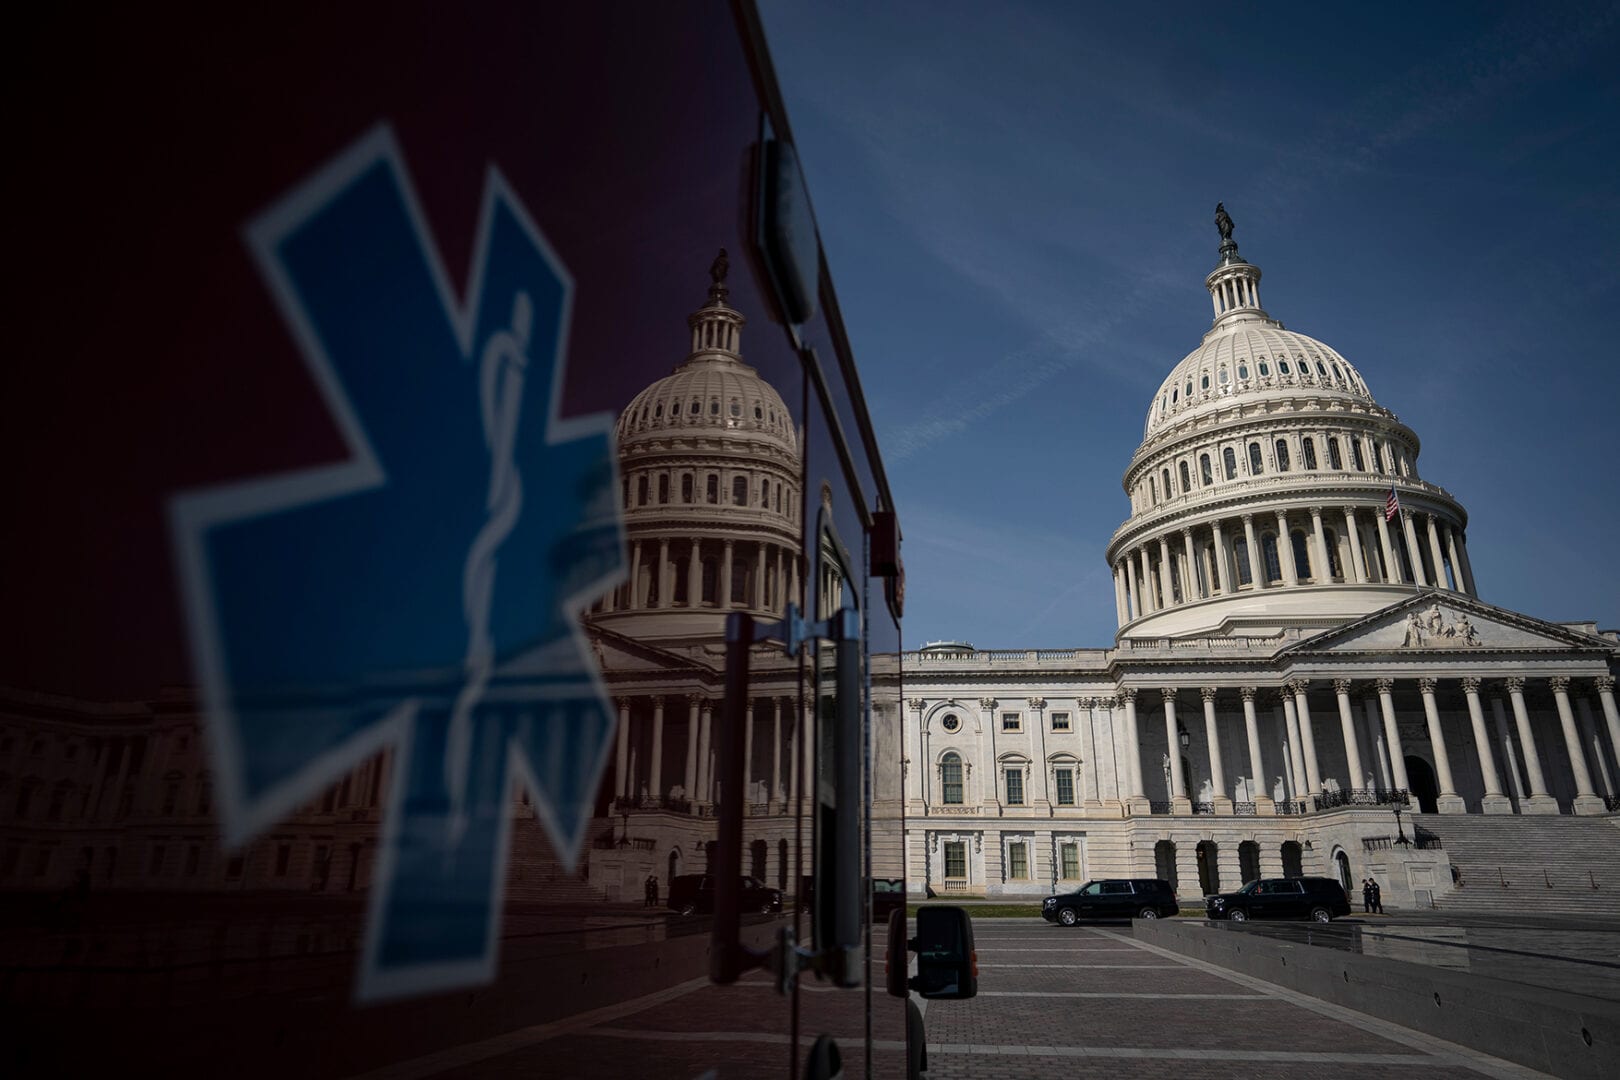 WASHINGTON, DC - MARCH 16: An ambulance sits parked on the plaza outside the U.S. Capitol March 16, 2020 in Washington, DC. After taking the weekend off, the Senate will return on Monday afternoon and will take up the House-passed coronavirus relief bill. The legislation in the House bill includes some provisions for paid emergency leave and free COVID-19 testing. (Photo by Drew Angerer/Getty Images)